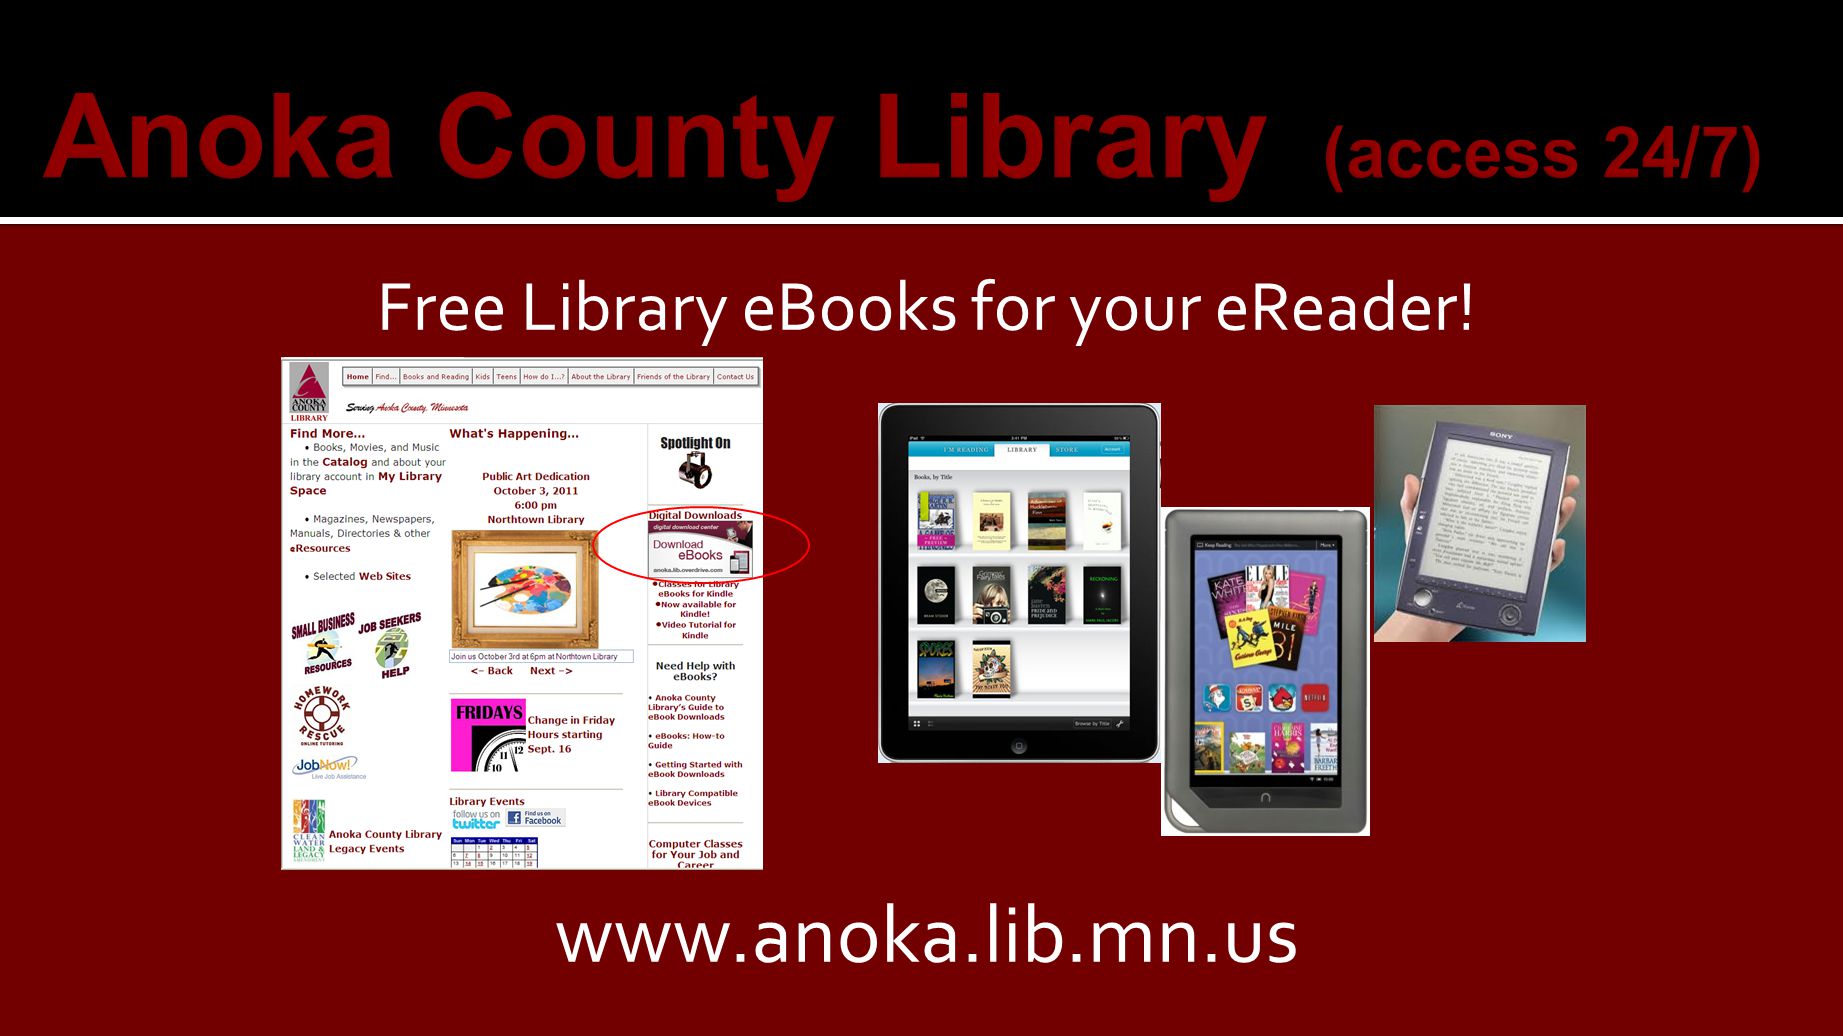 Anoka County Library (access 24/7) Free Library eBooks for your eReader!